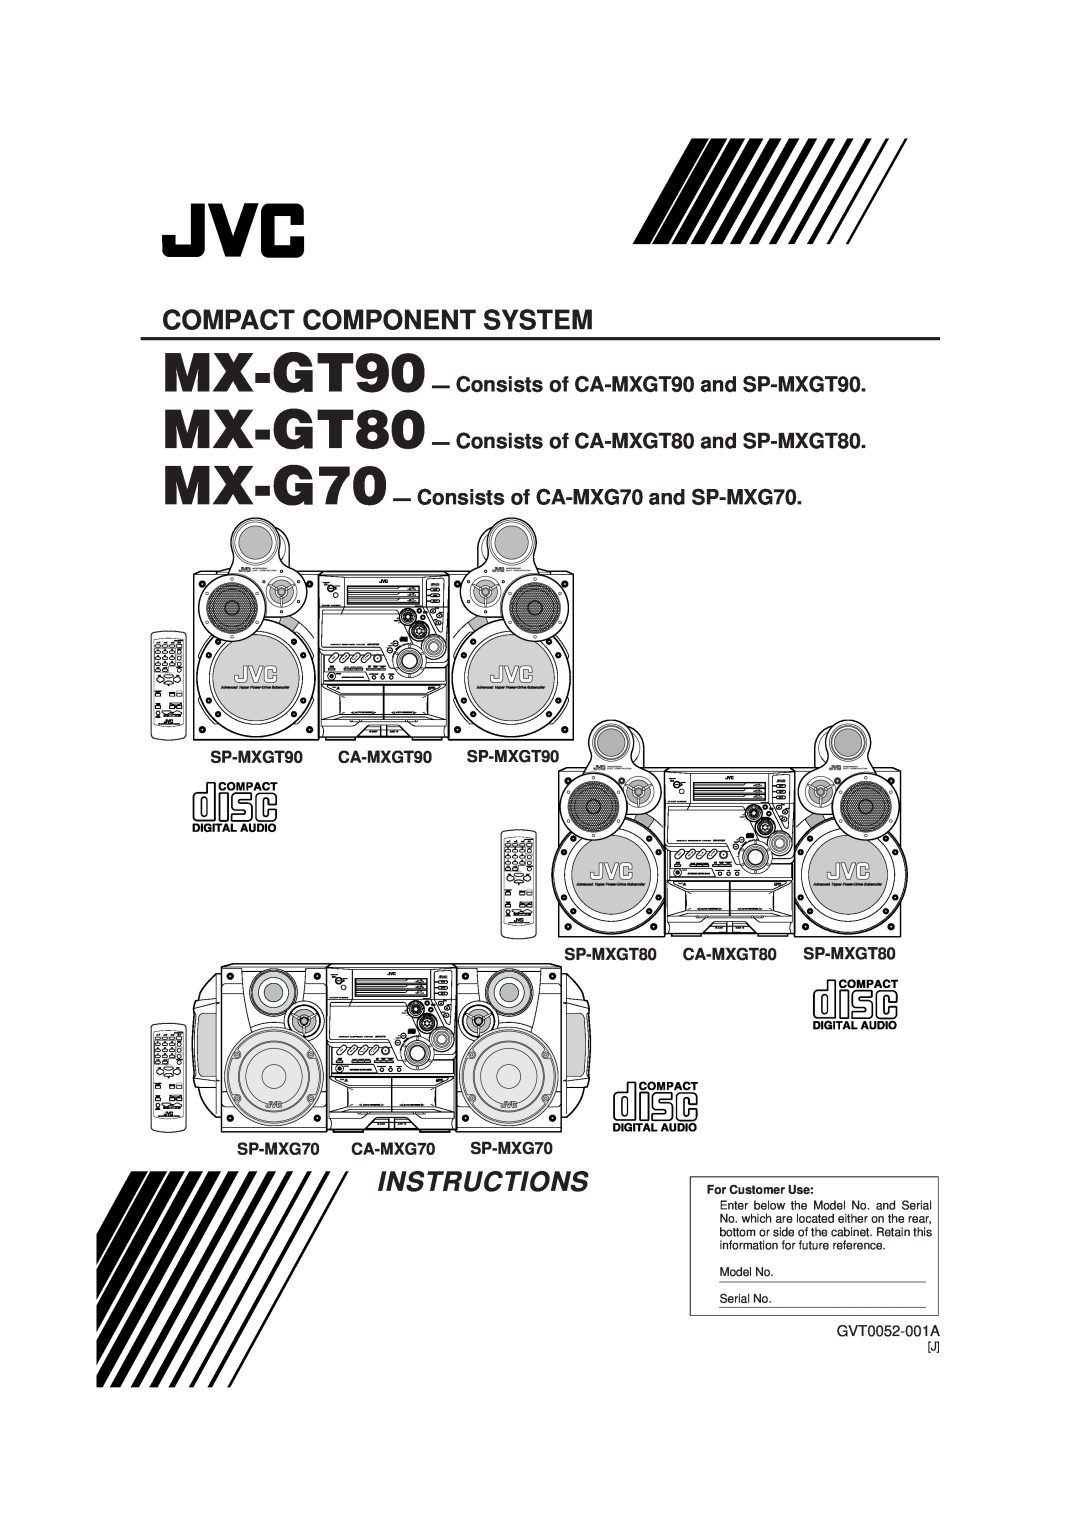 JVC MX-GT90 manual Compact Component System, SP-MXGT90 CA-MXGT90, SP-MXG70, SP-MXGT80, CA-MXGT80, GVT0052-001A, MX-G70 